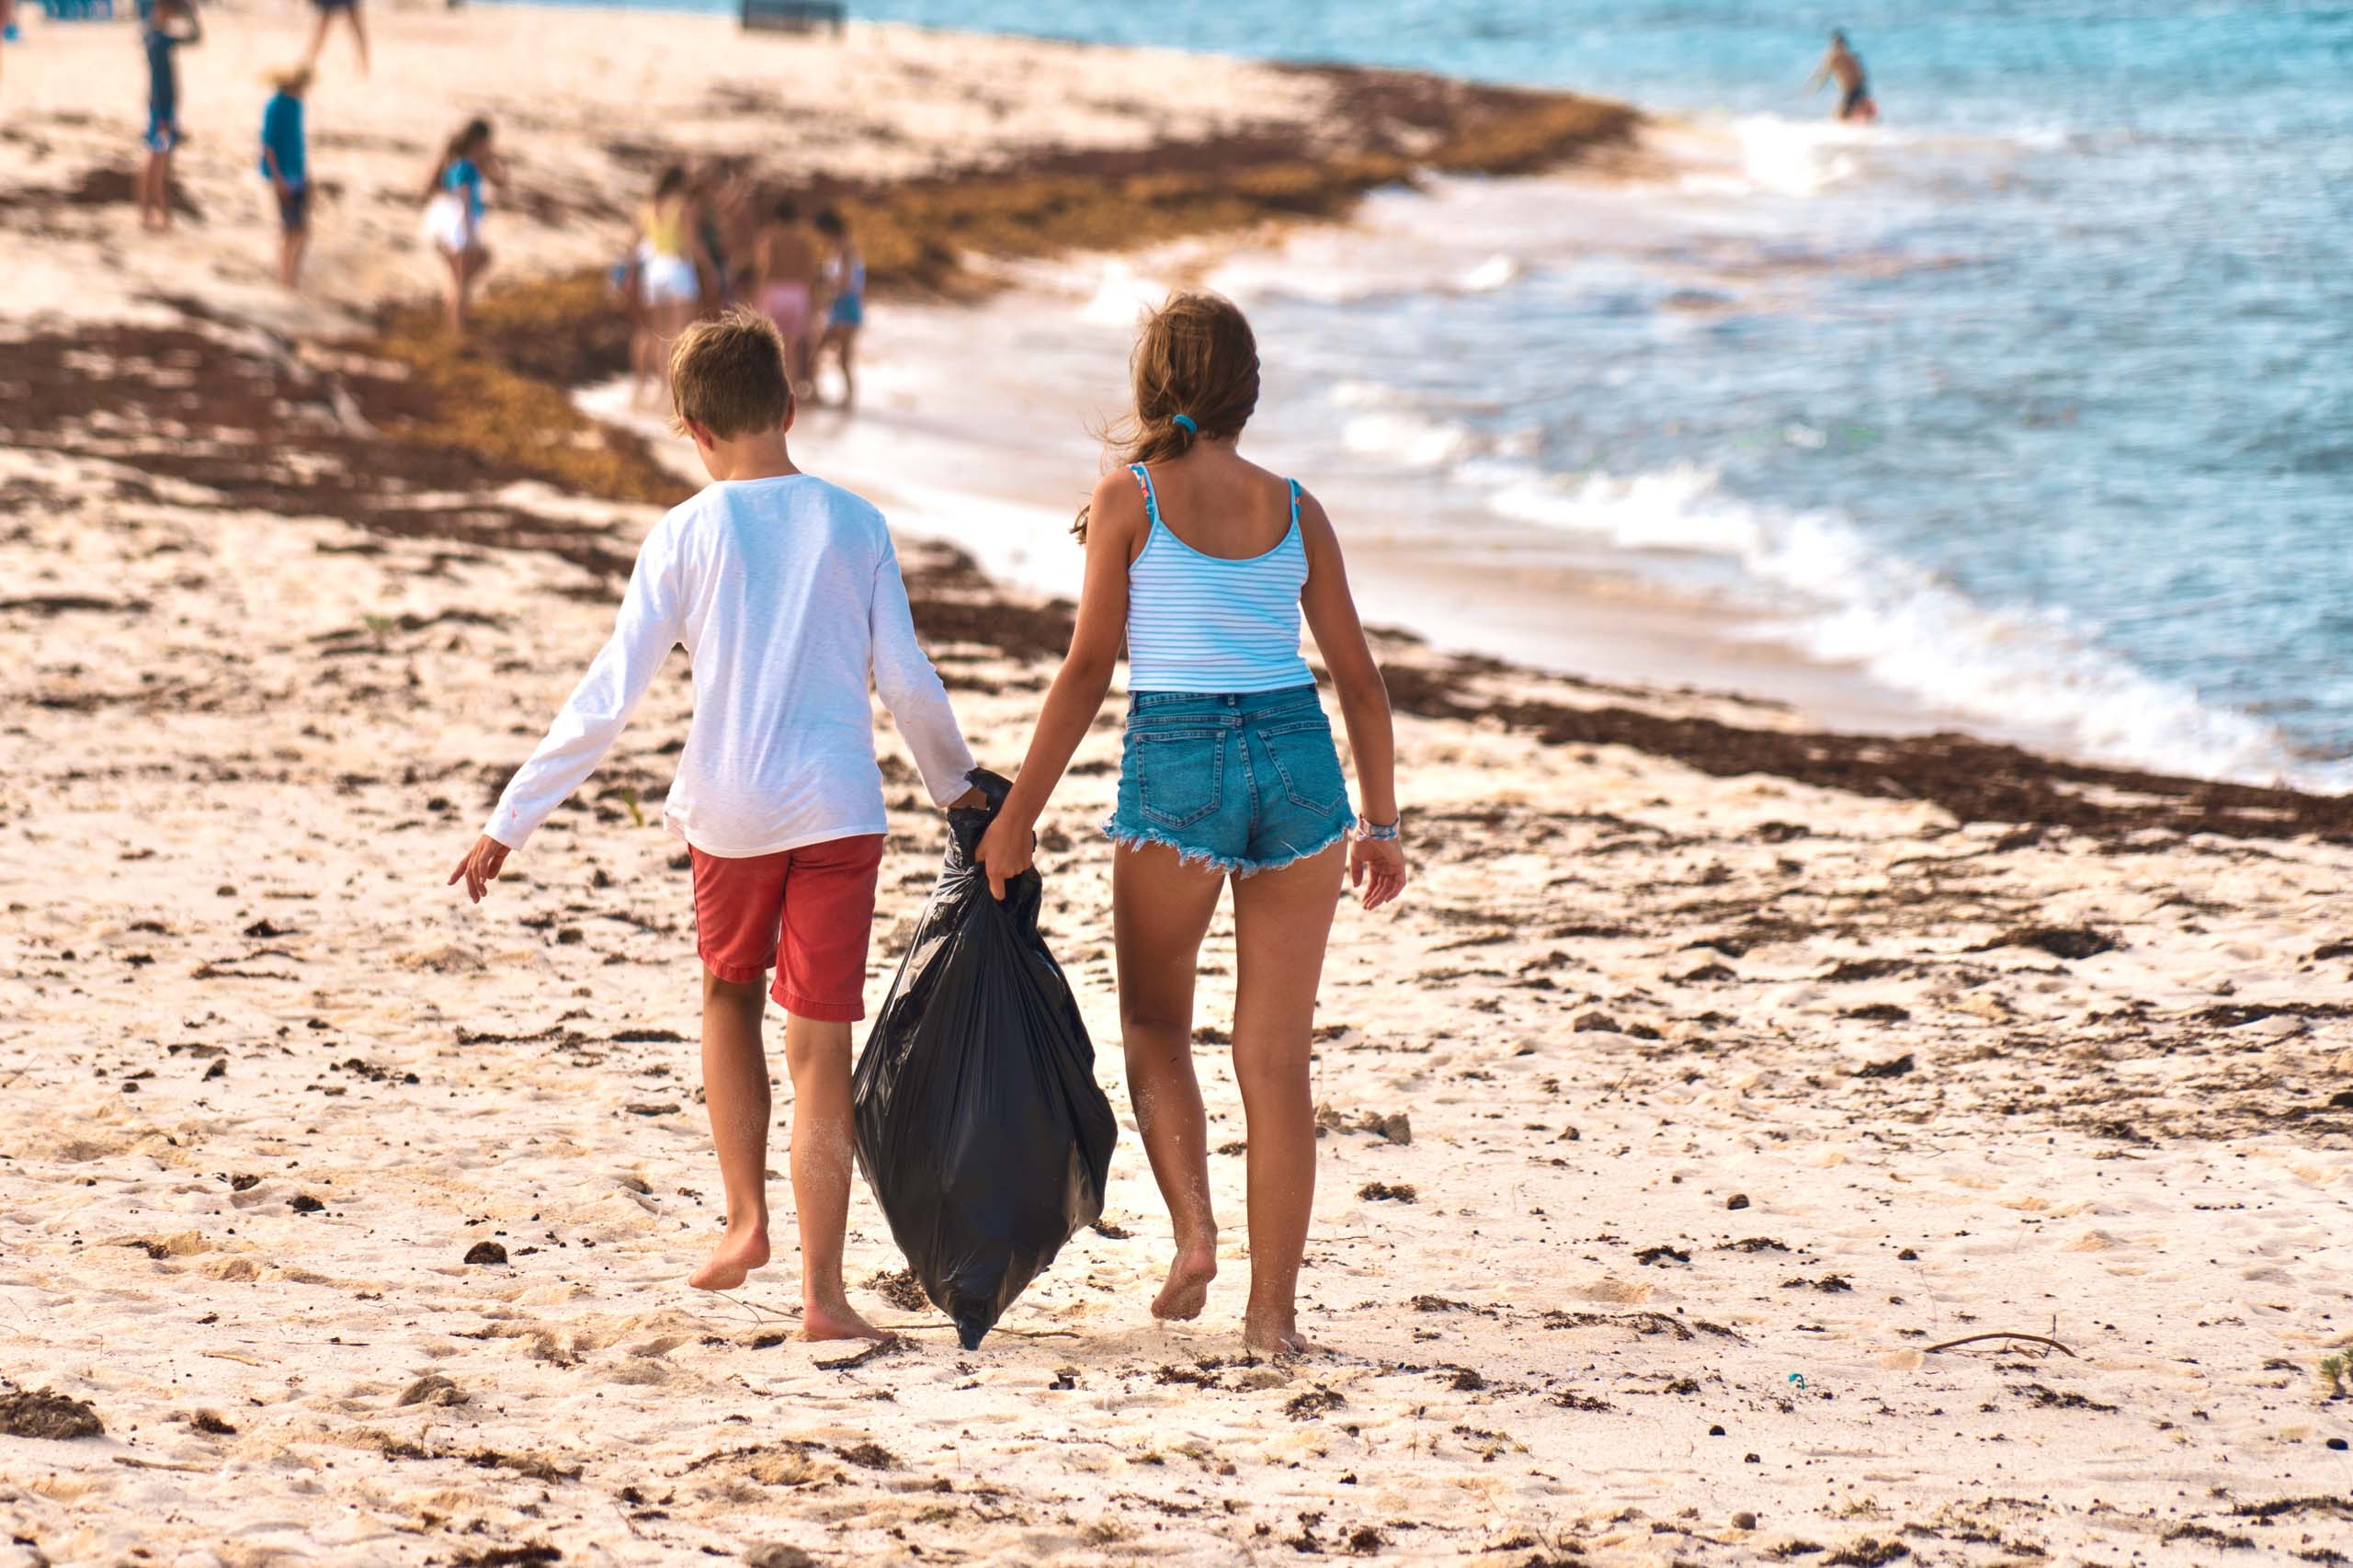 Two children walking along a beach with a trash bag.